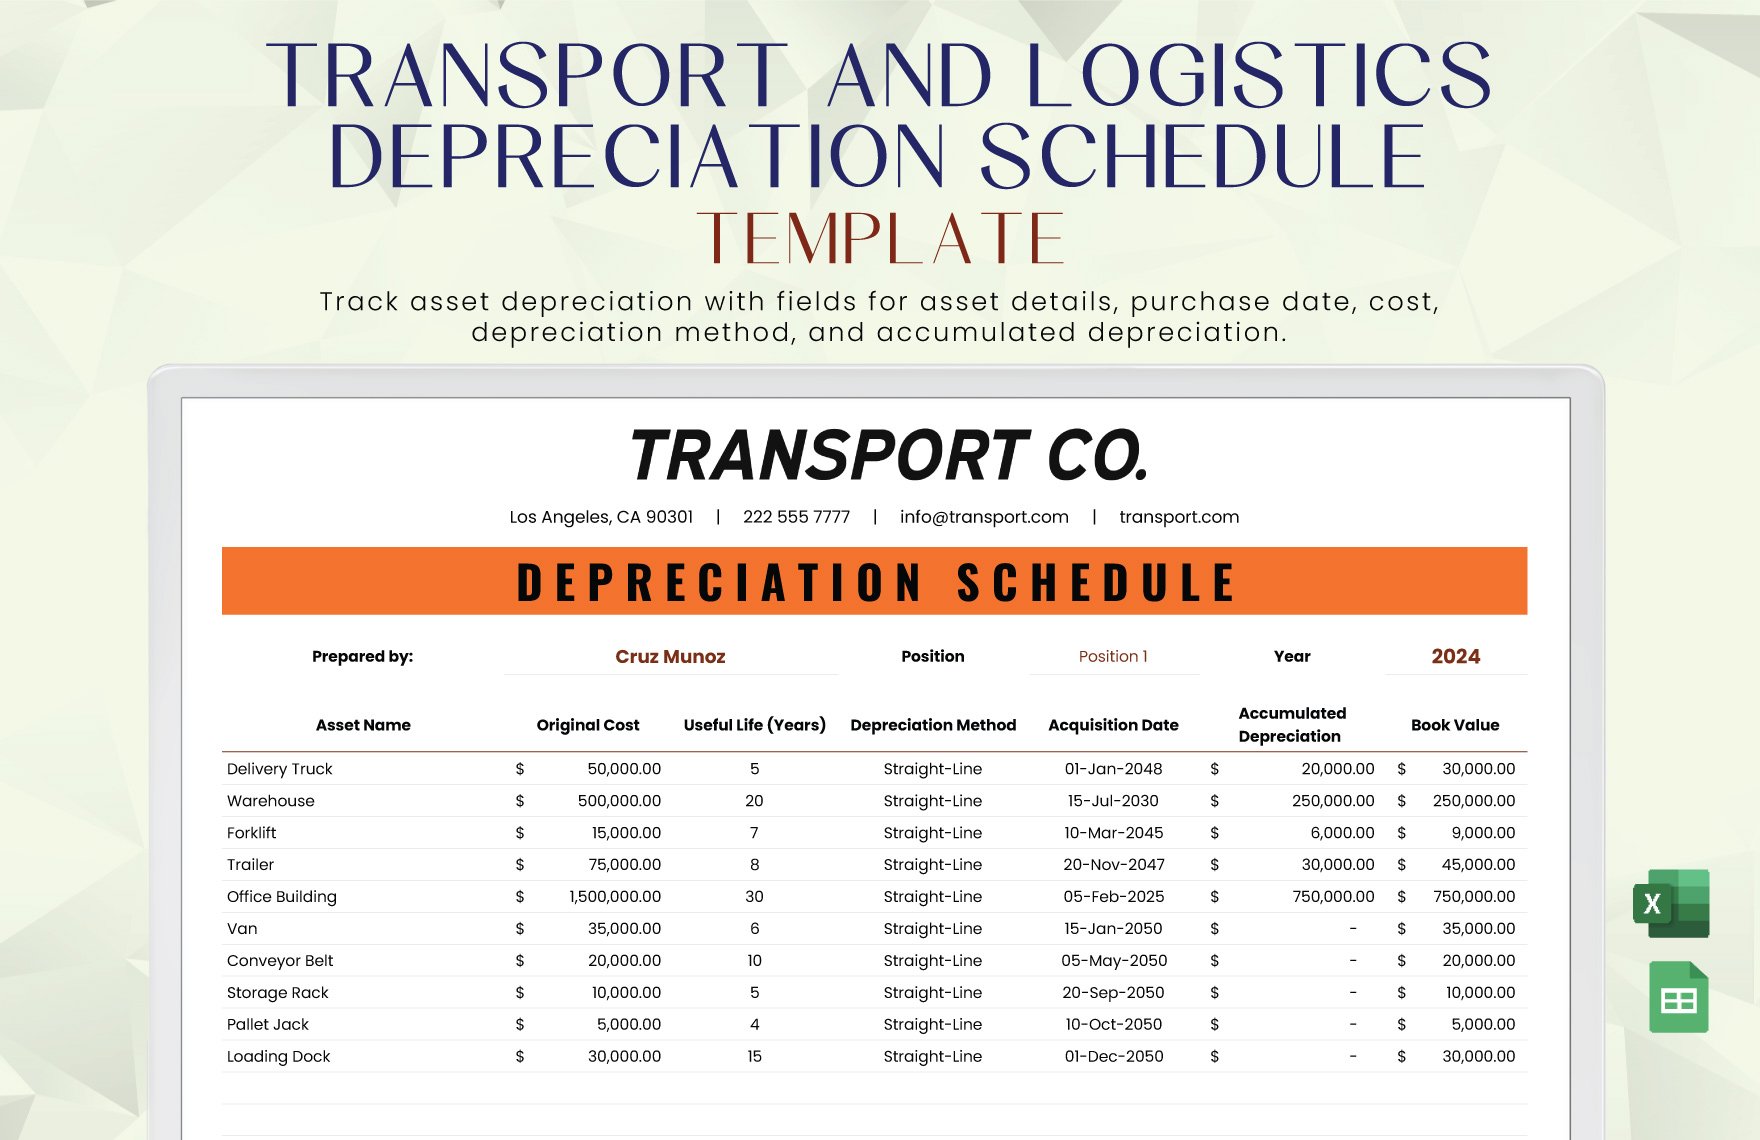 Free Transport and Logistics Depreciation Schedule Template in Excel, Google Sheets